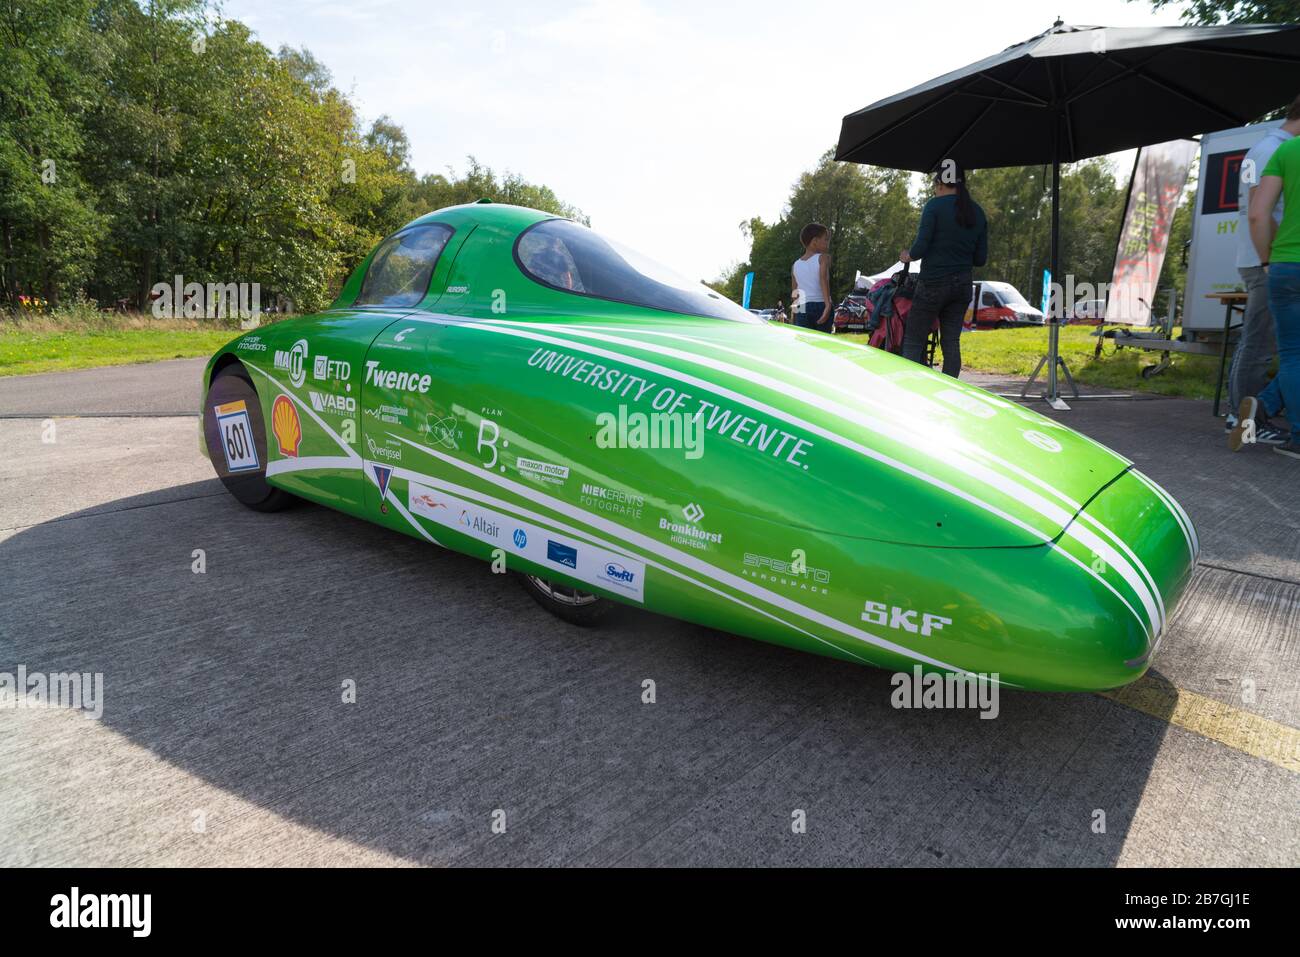 ENSCHEDE, NETHERLANDS - 16 AUGUST 2018: Hydrogen car from the Green Team Twente, a student team from the university of Twente, who are designing, buil Stock Photo